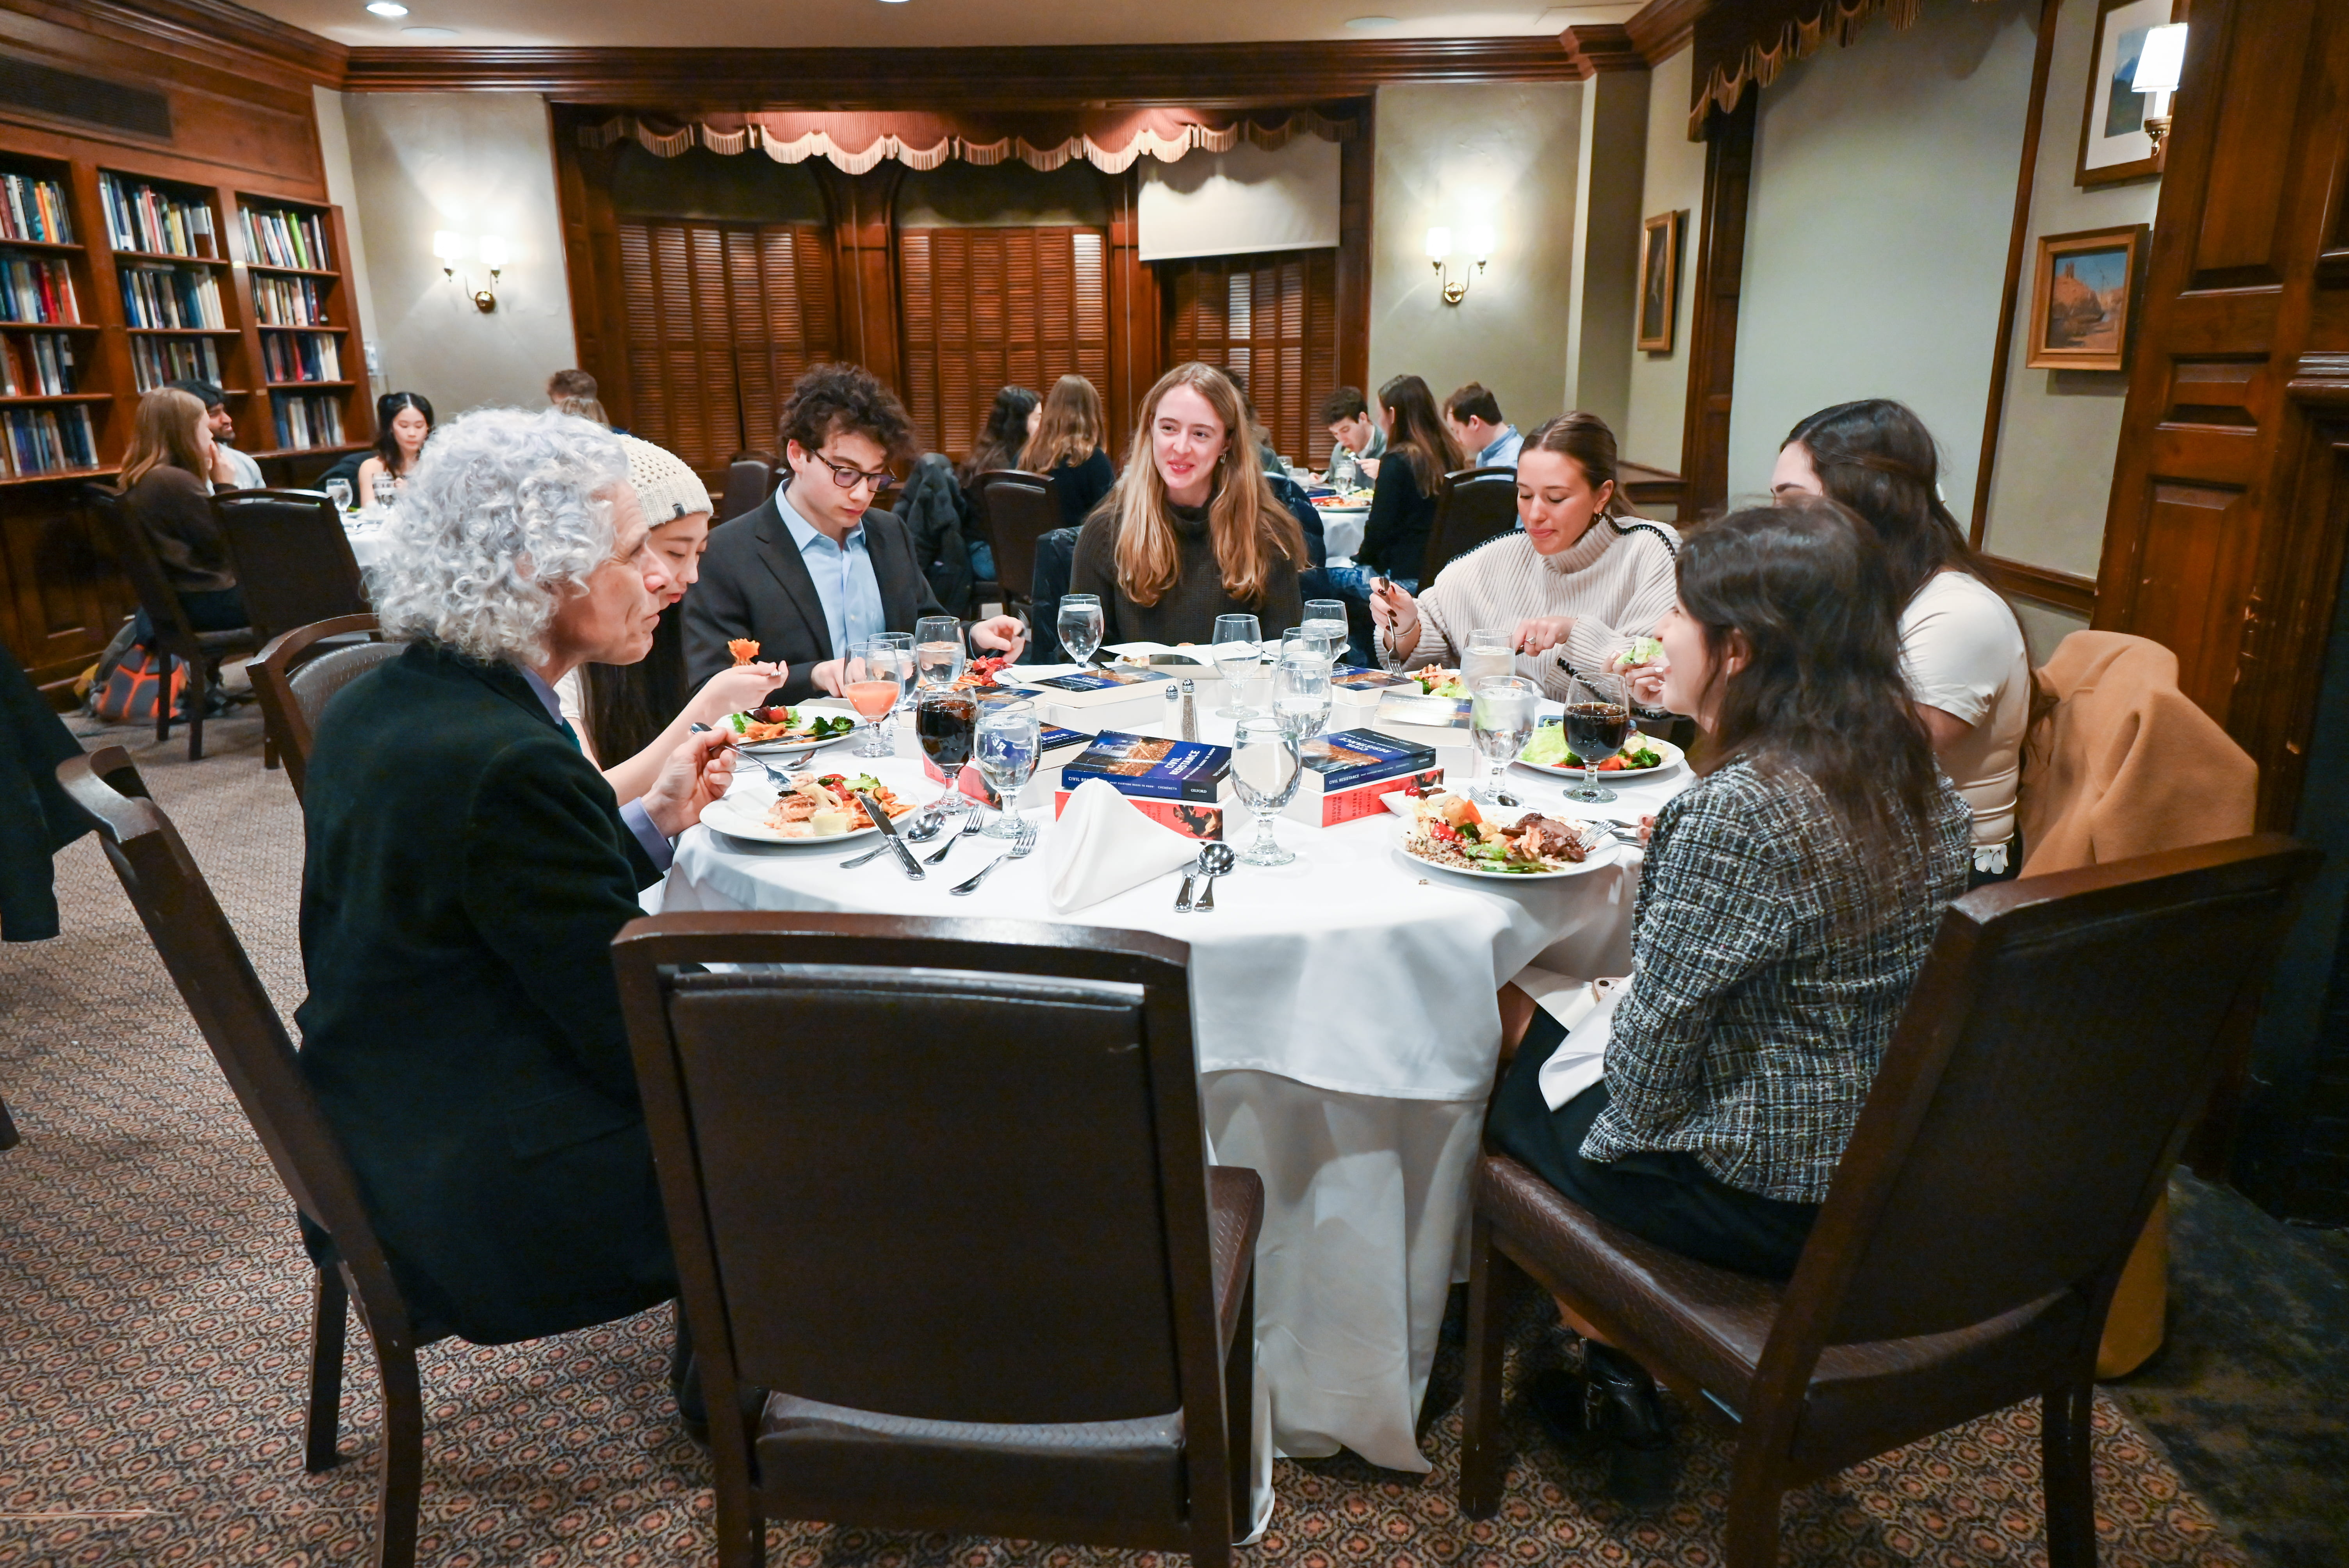 Post-faculty dialogue, students and faculty further discuss the topic over a shared meal.